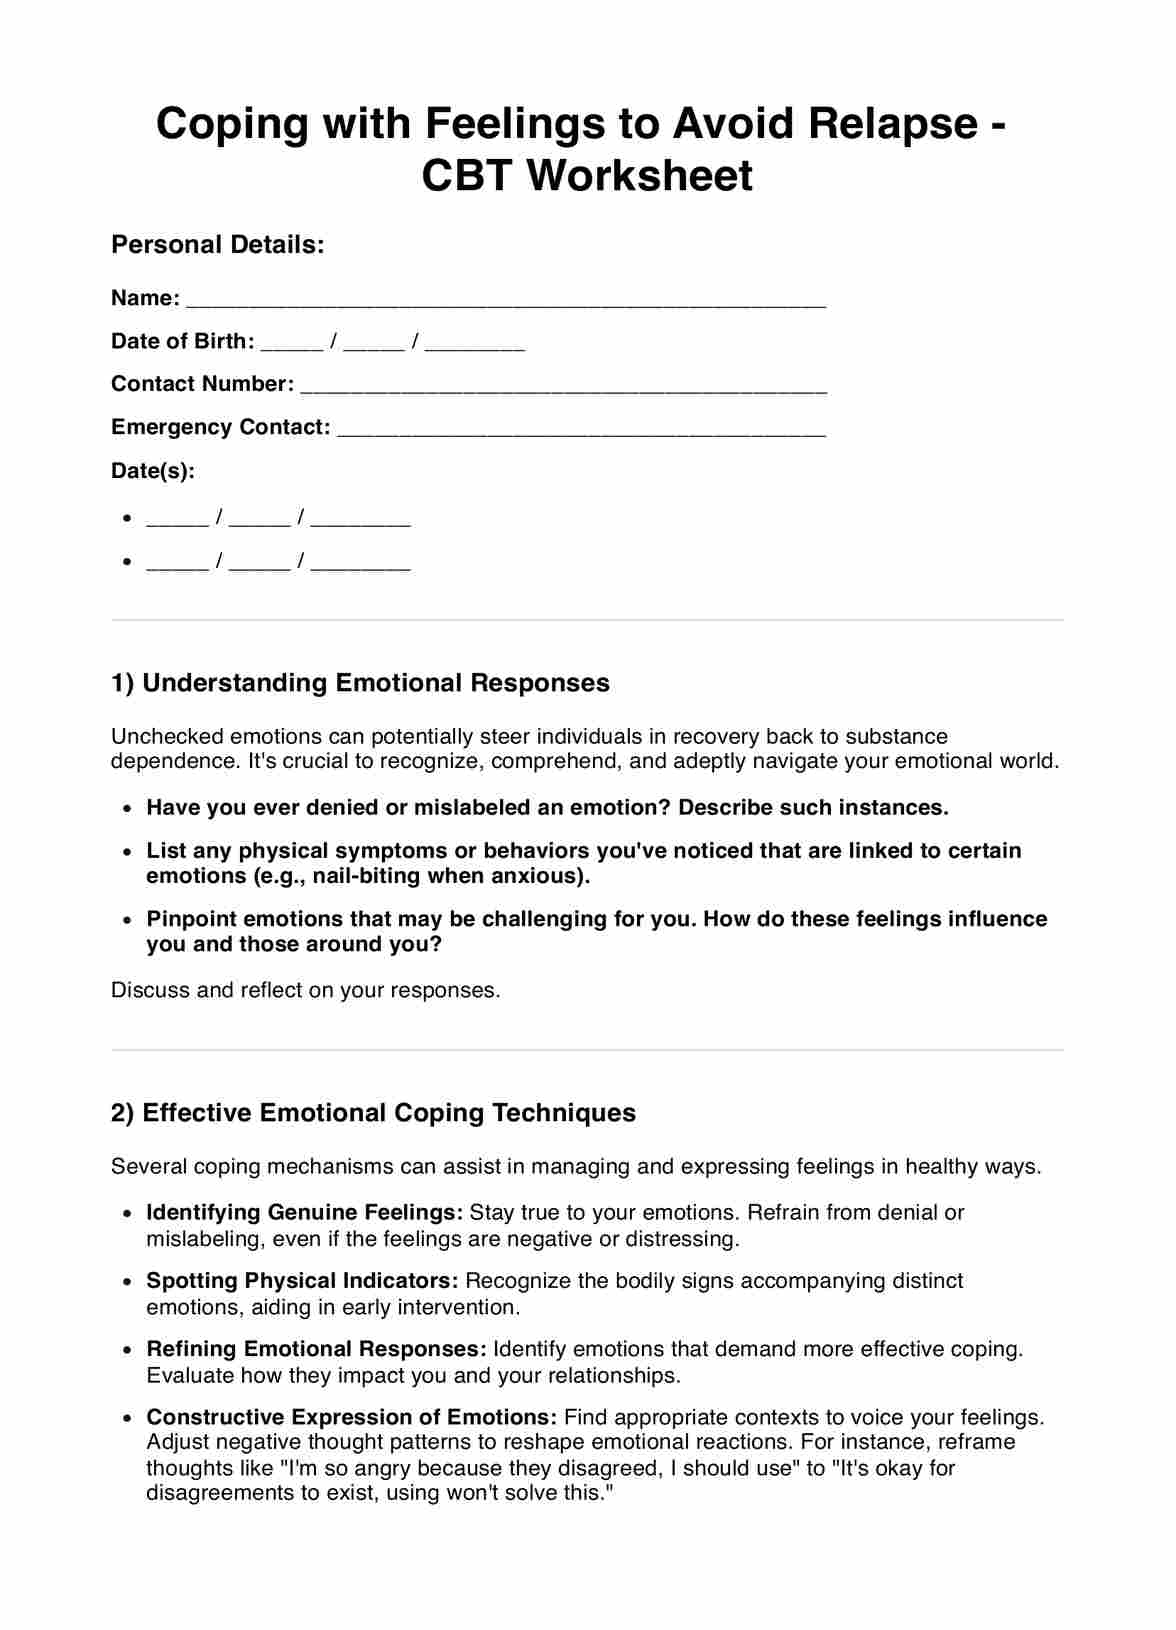 Coping with Feelings to Avoid Relapse CBT Worksheet PDF Example